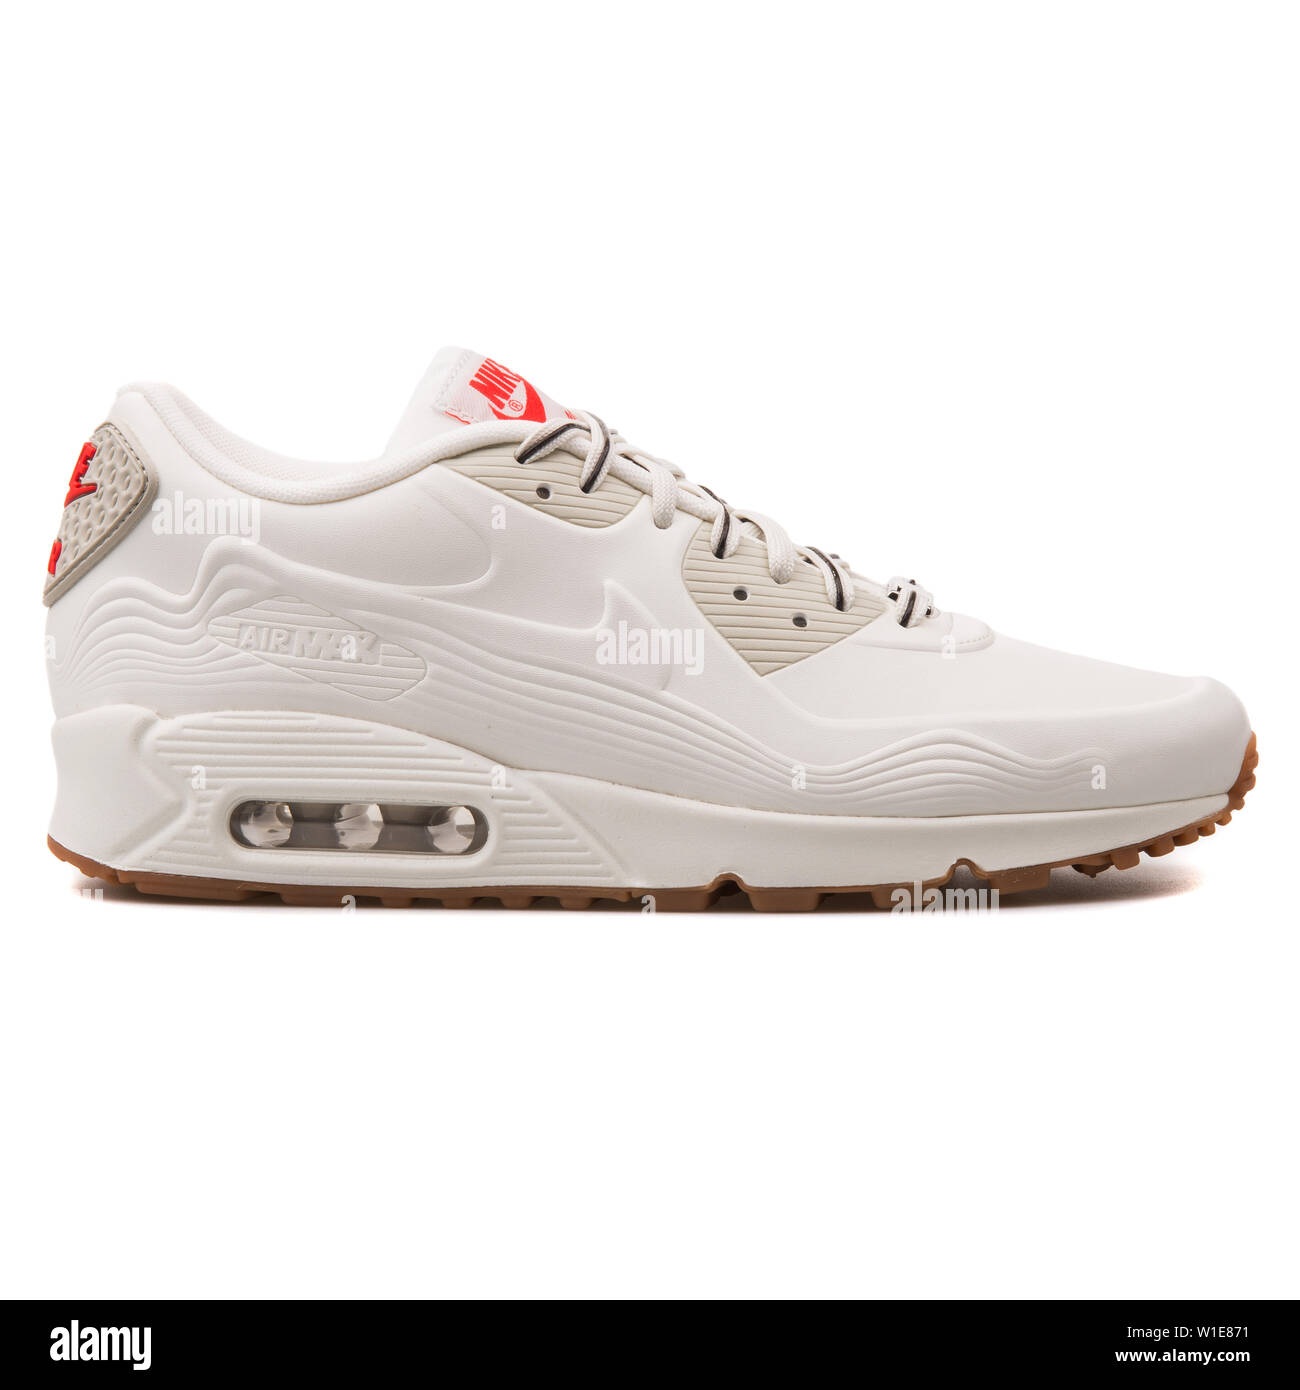 VIENNA, AUSTRIA - AUGUST 25, 2017: Nike Air Max 90 VT QS white and red  sneaker on white background Stock Photo - Alamy